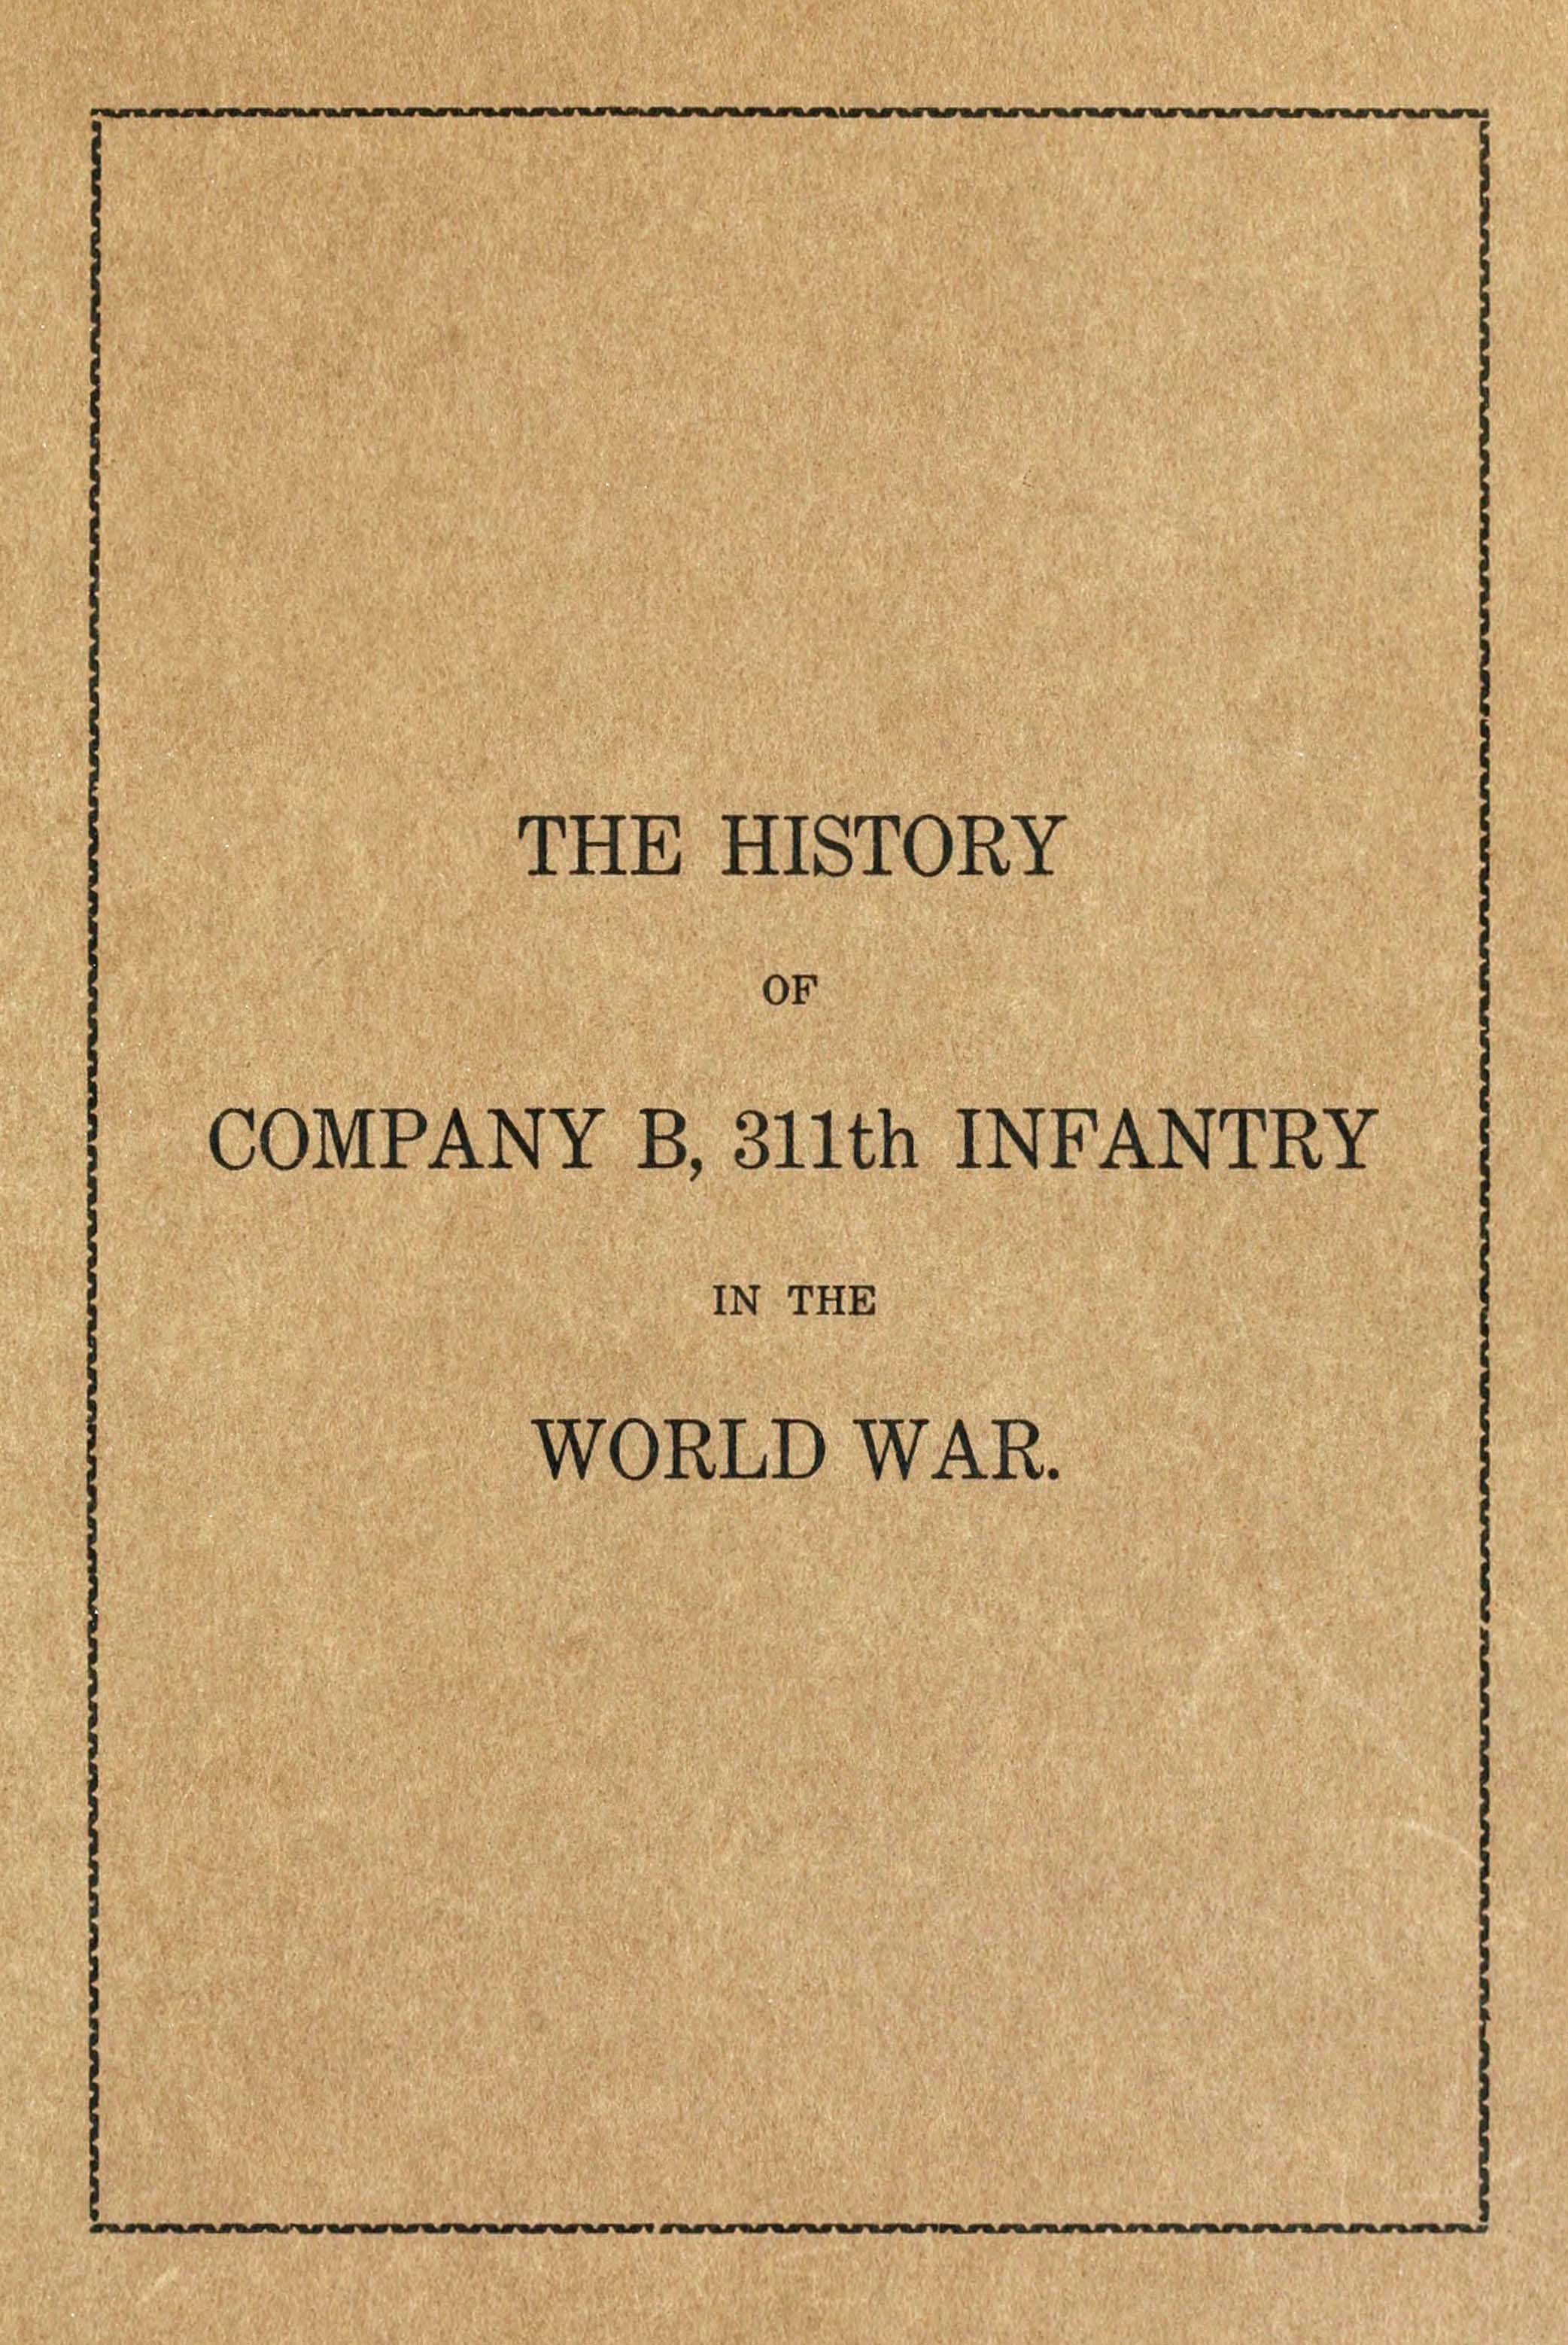 The history of Company B, 311th Infantry in the World War